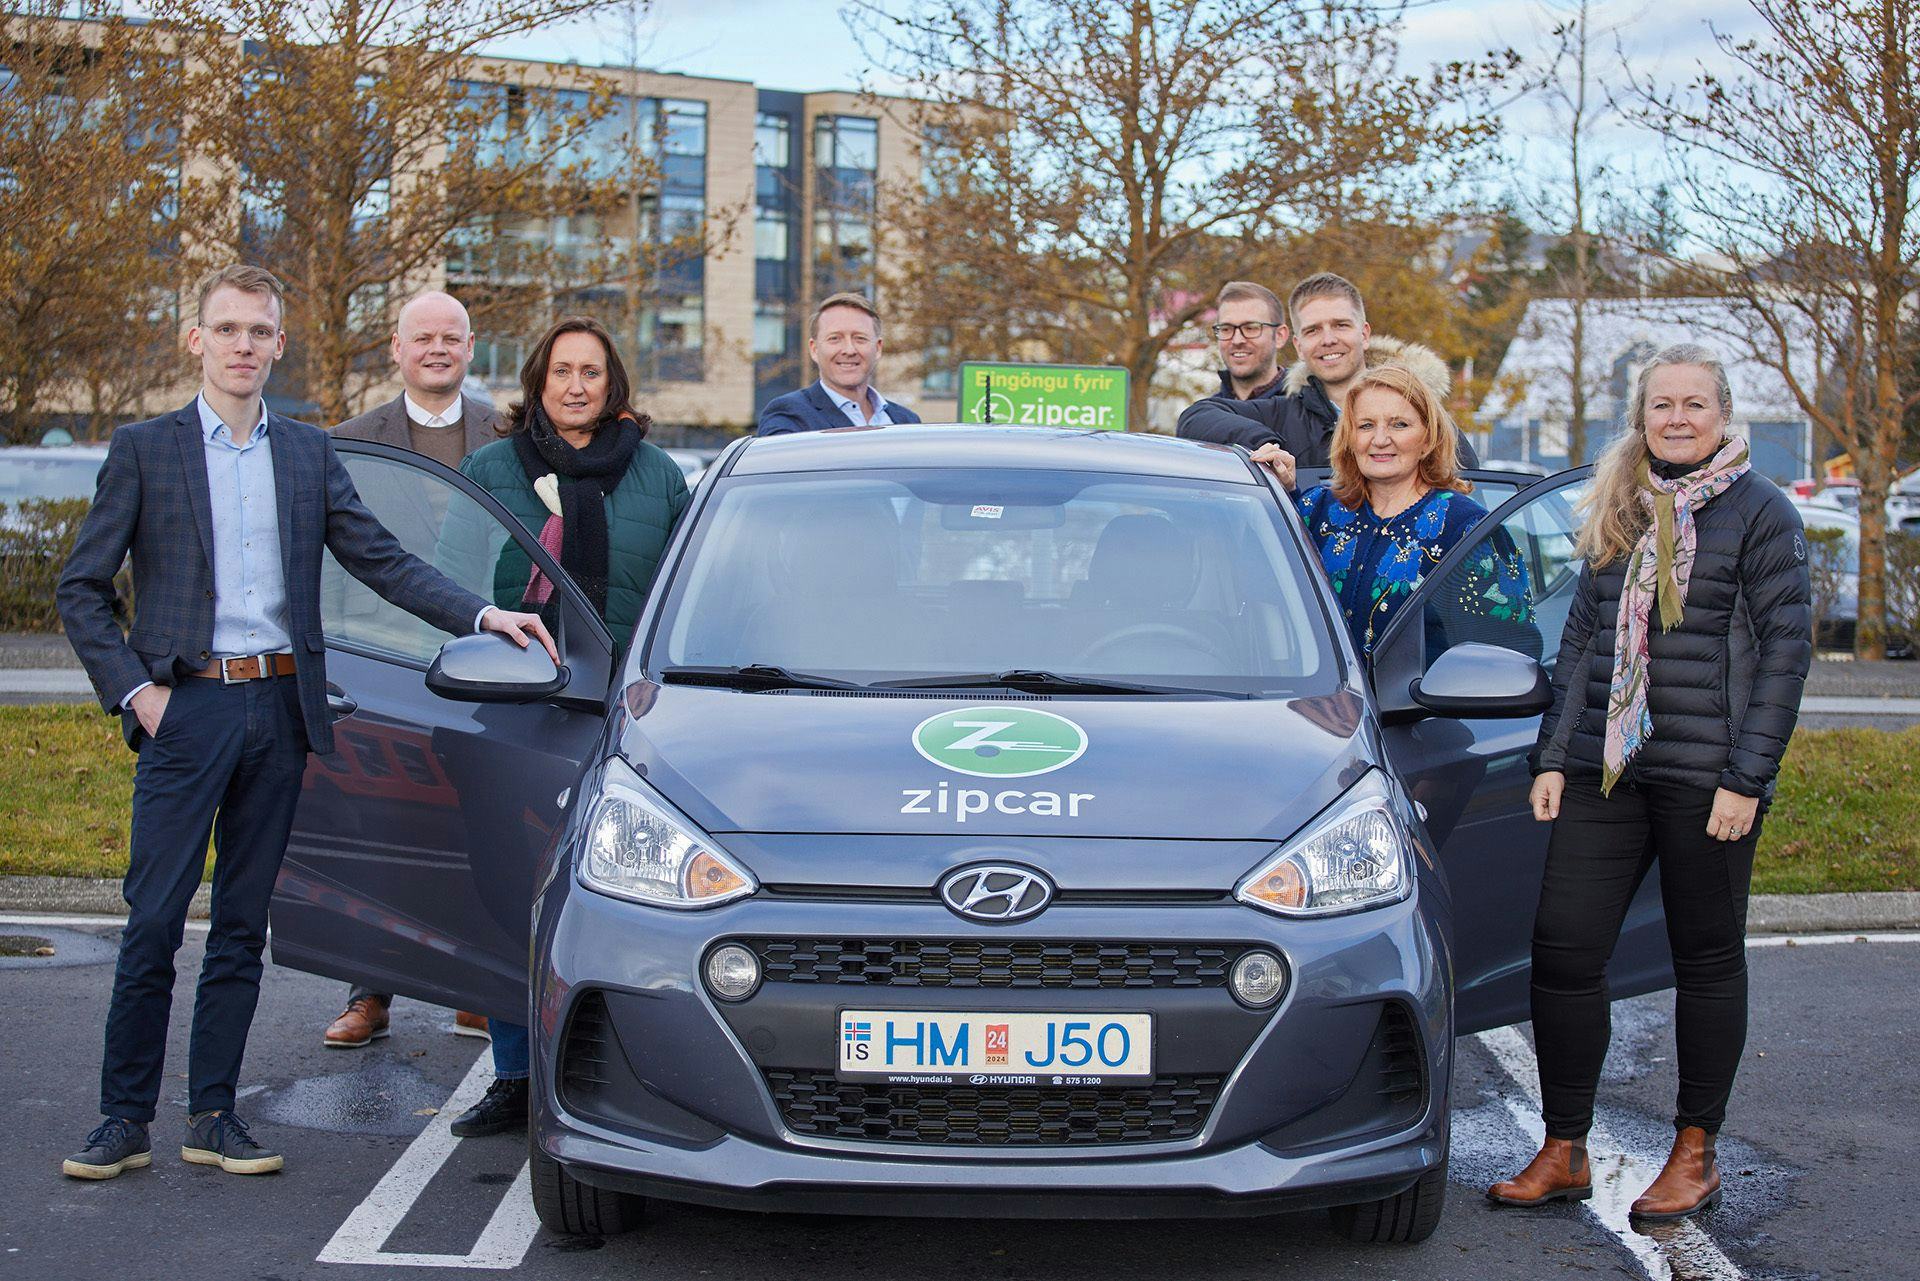 A group of people posing with a Hyundai Zipcar in a parking lot 